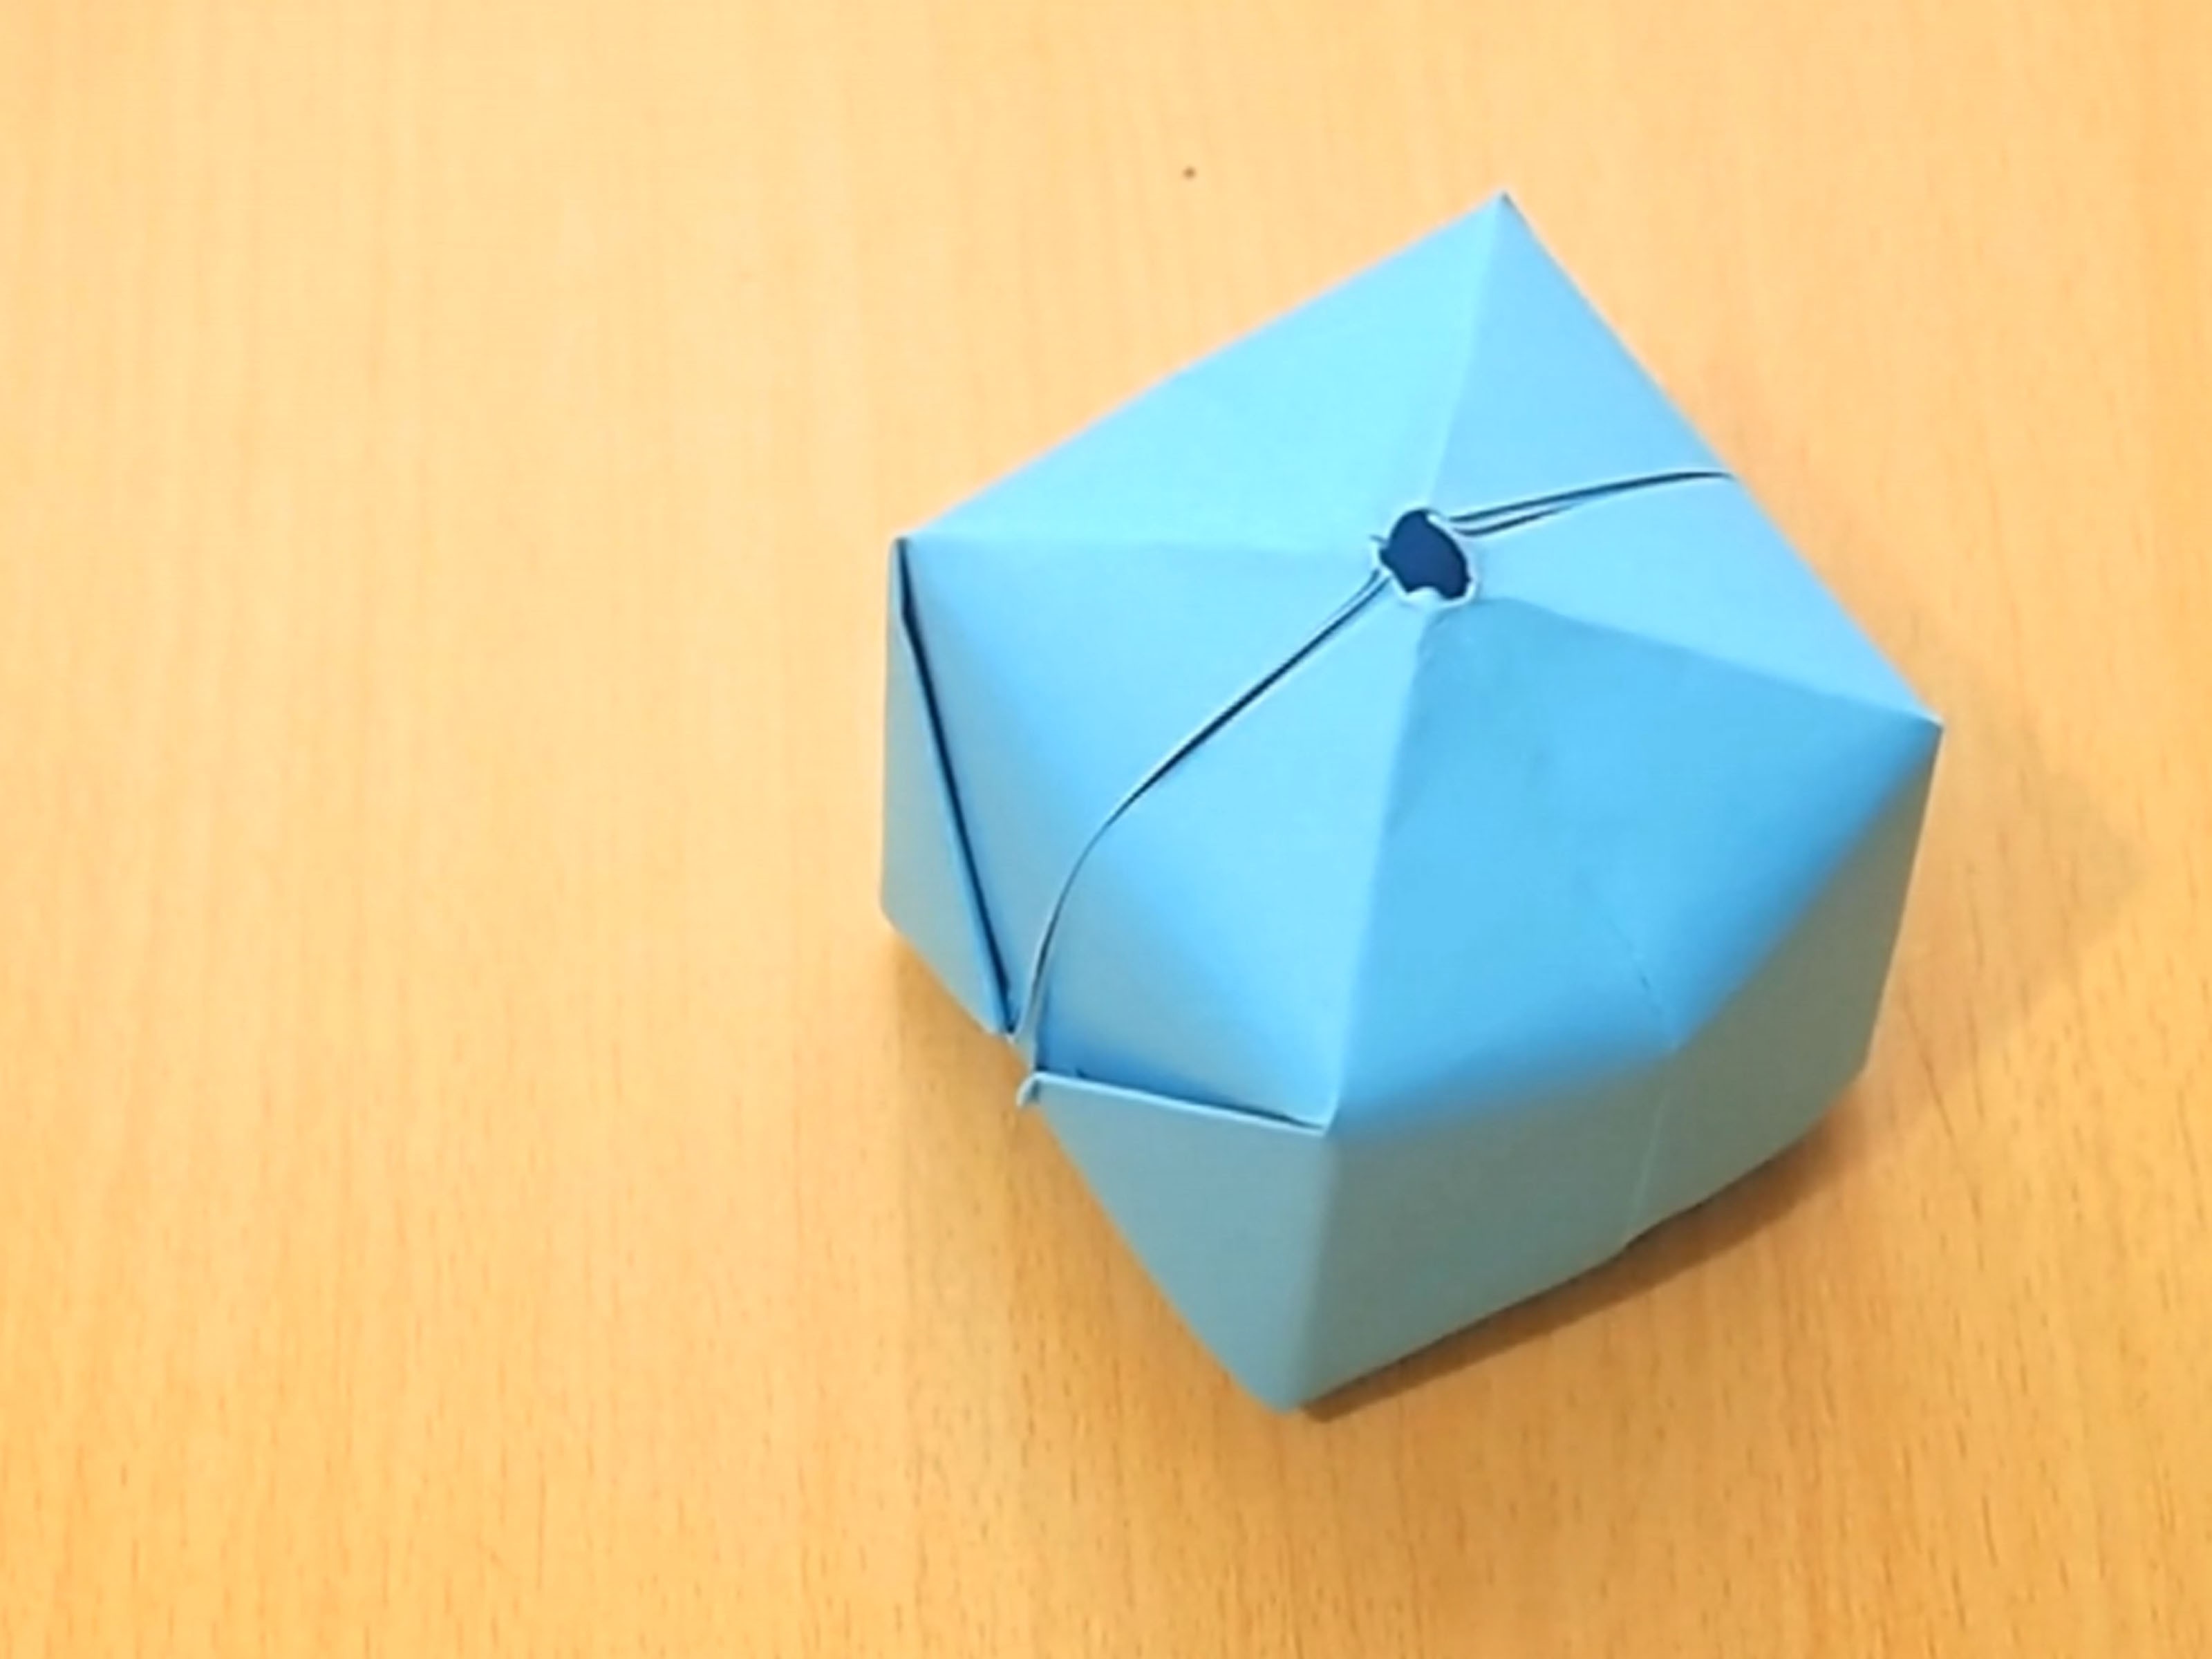 Ball Papercraft How to Make An origami Balloon 8 Steps with Wikihow